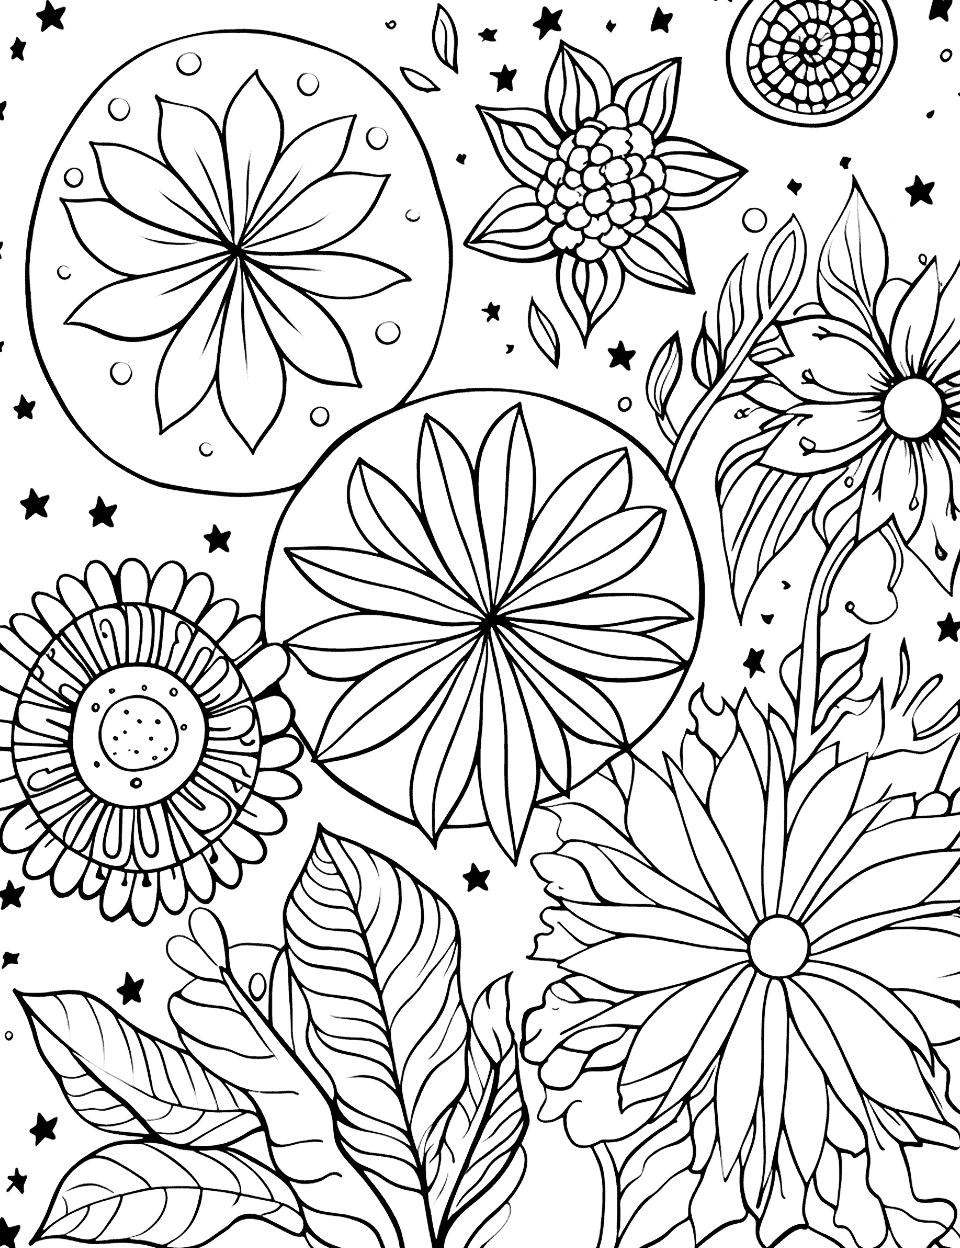 Galaxy Floral Garden Adult Coloring Page - A floral garden with a galaxy twist featuring star-shaped flowers and constellation patterns on leaves.